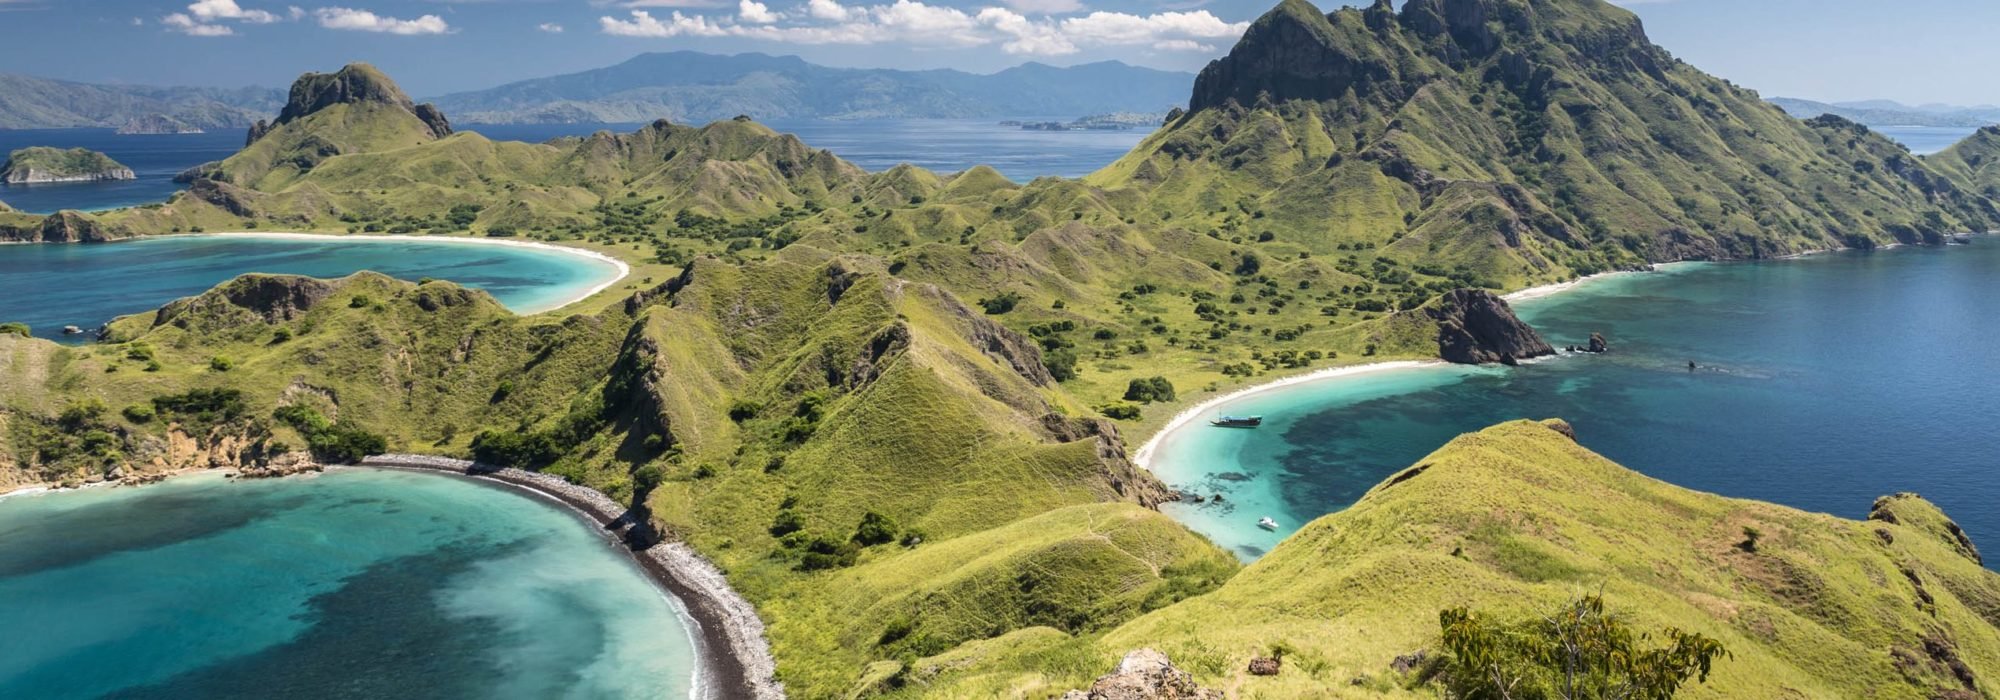 Komodo travel agents packages deals